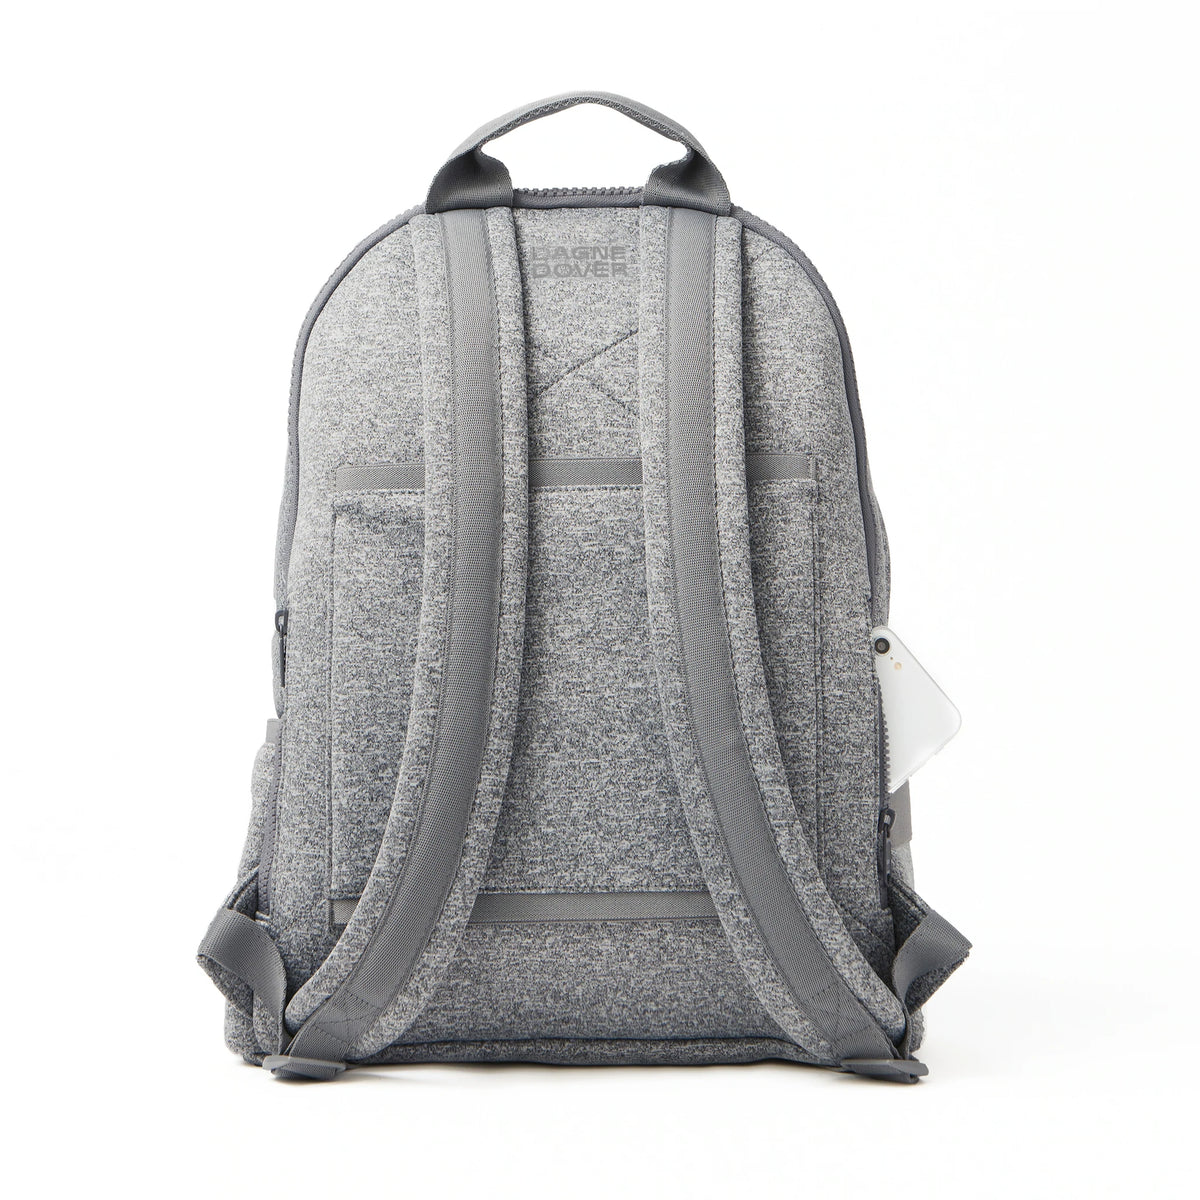 Aer Travel Pack 3 Small Backpack in Heather Gray